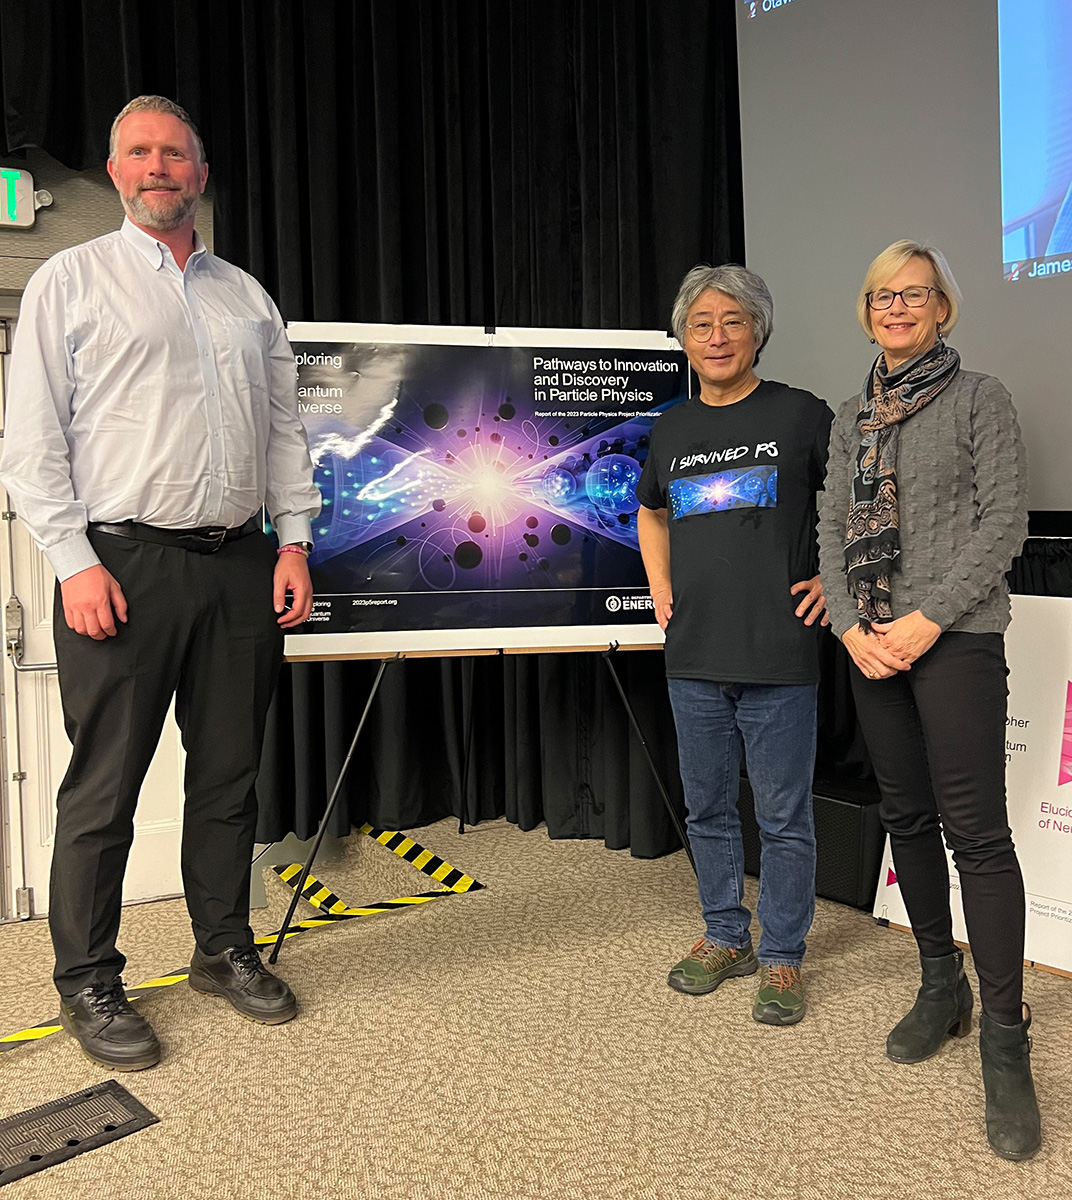 Three people (Cameron Geddes, Hitoshi Murayama, and Natalie Roe) standing in front of a poster in a conference hall.